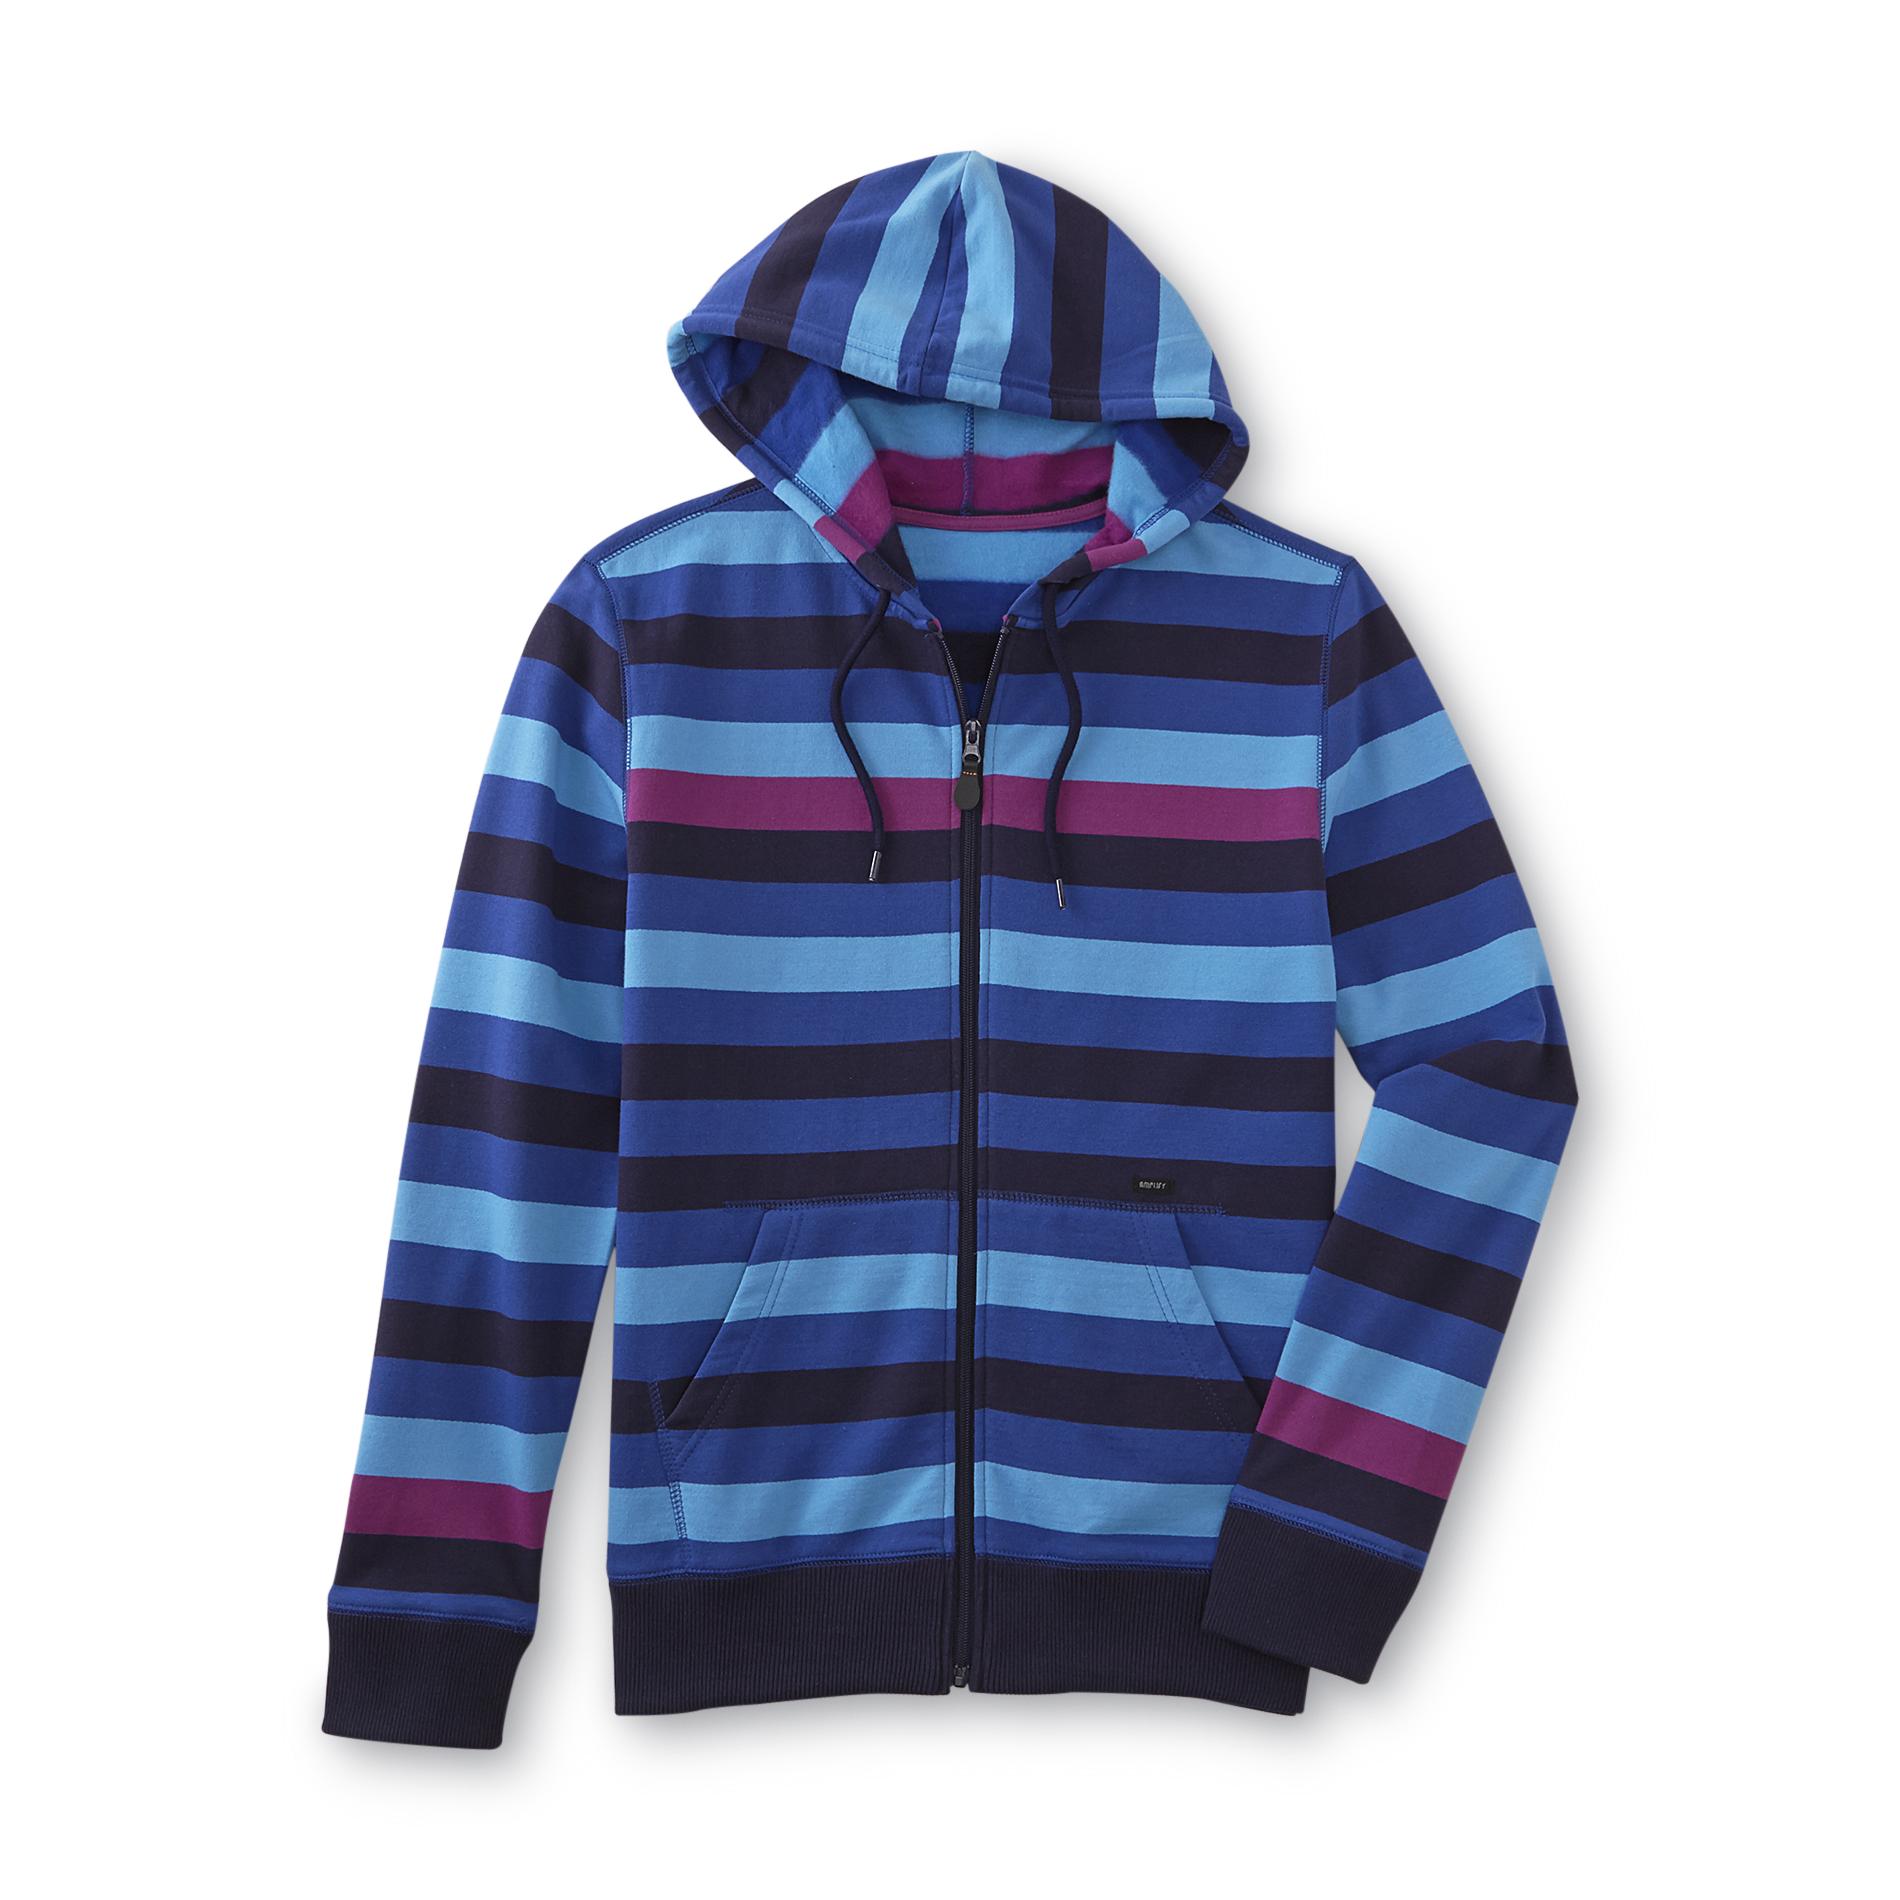 Amplify Young Men's Hoodie Jacket - Striped